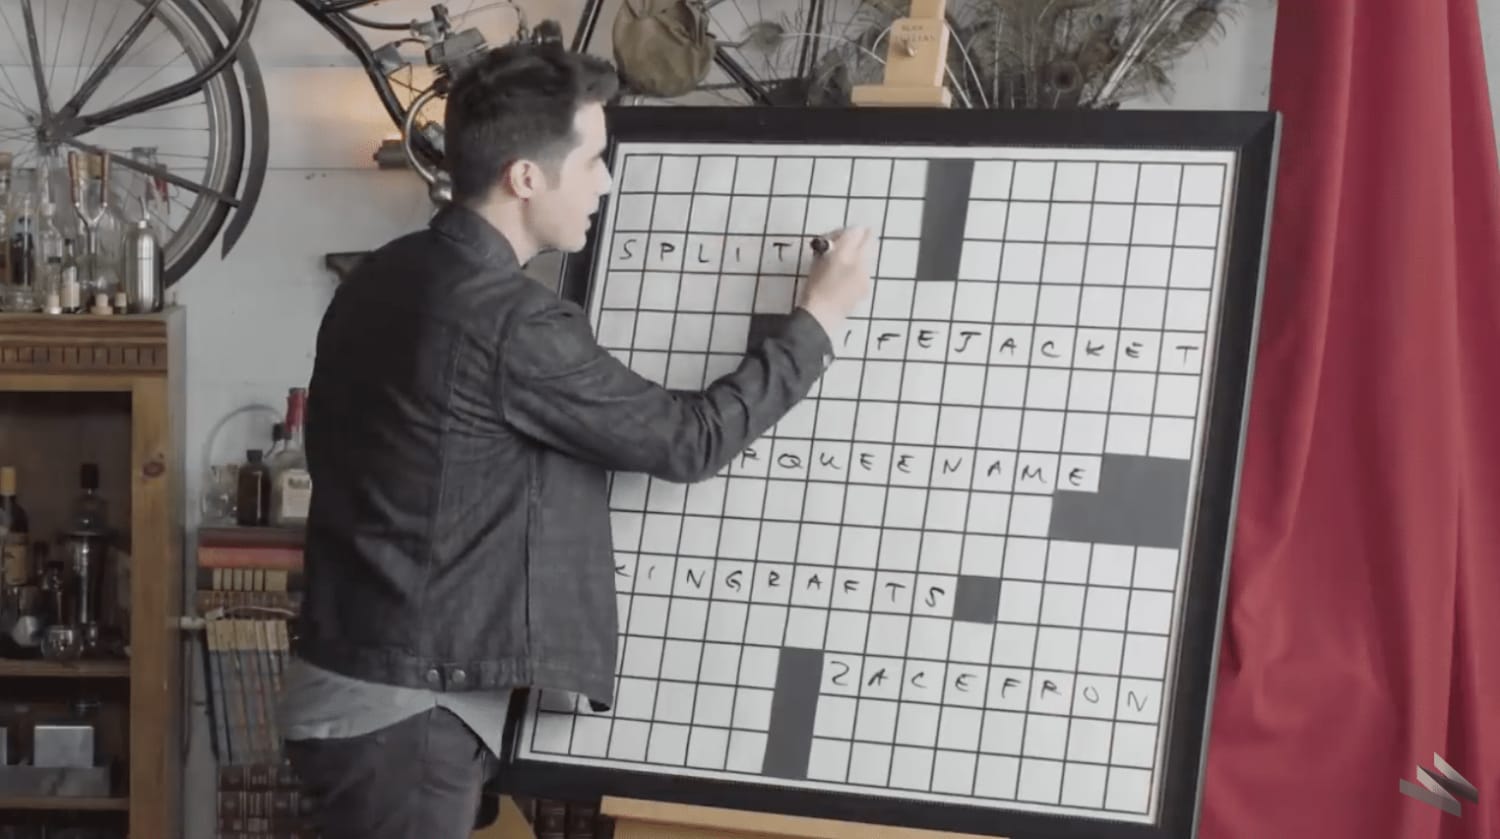 How does a cruciverbalist create crossword puzzles? | The Kid Should See This